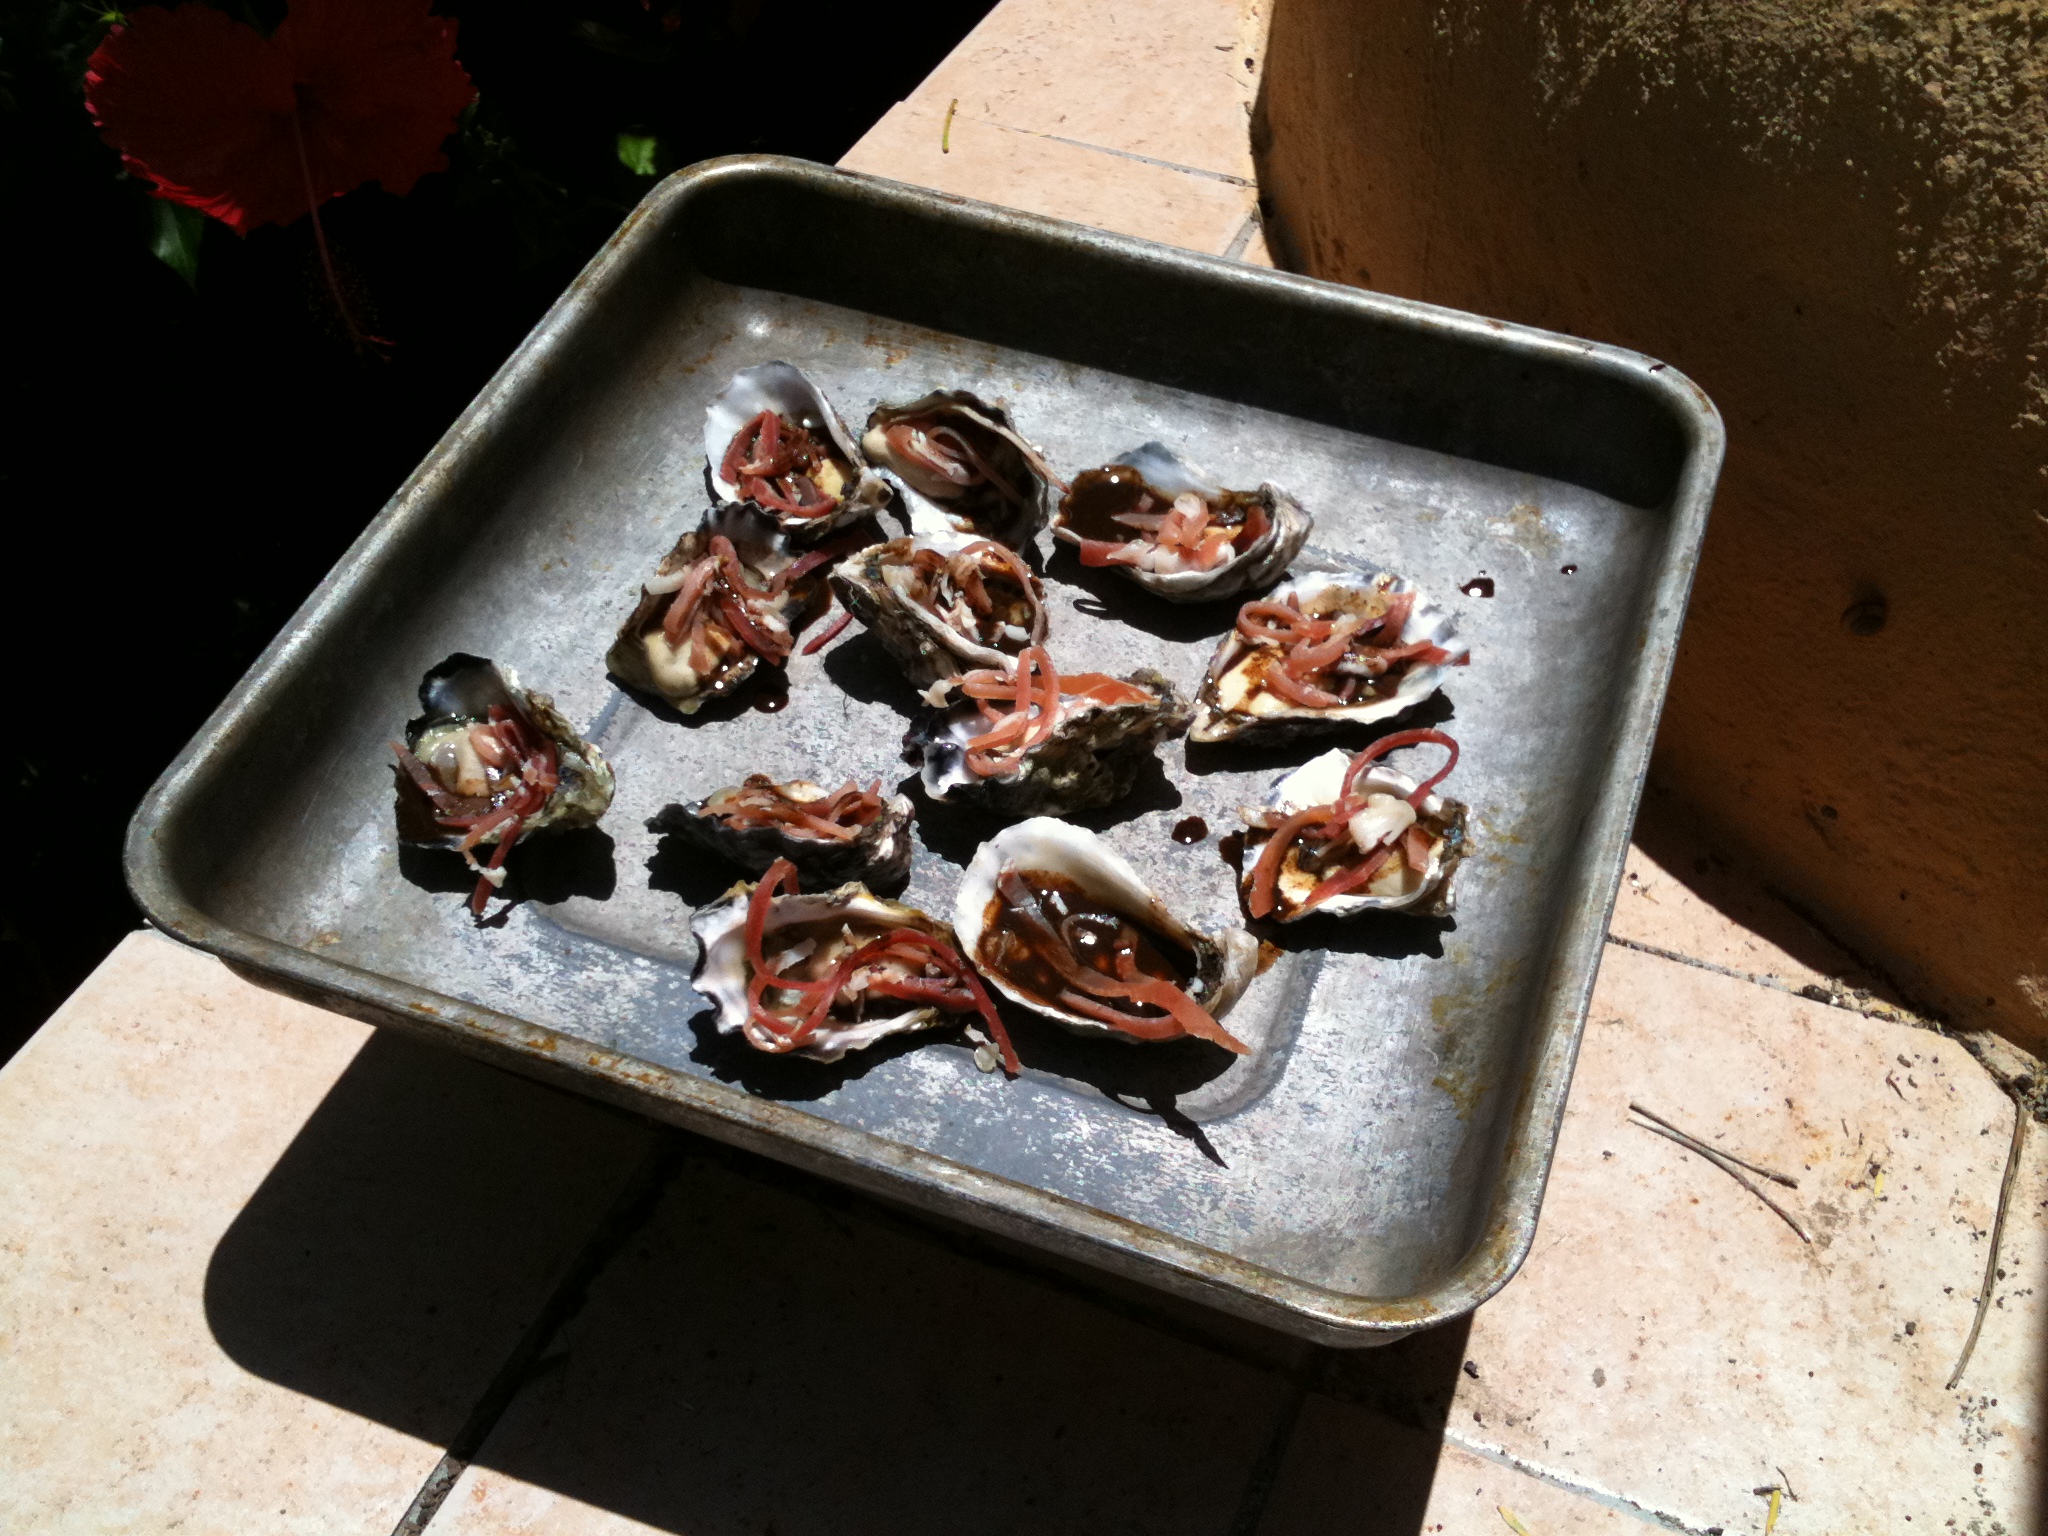 Click image for larger version  Name:	oysters.jpg Views:	1 Size:	1.11 MB ID:	287713